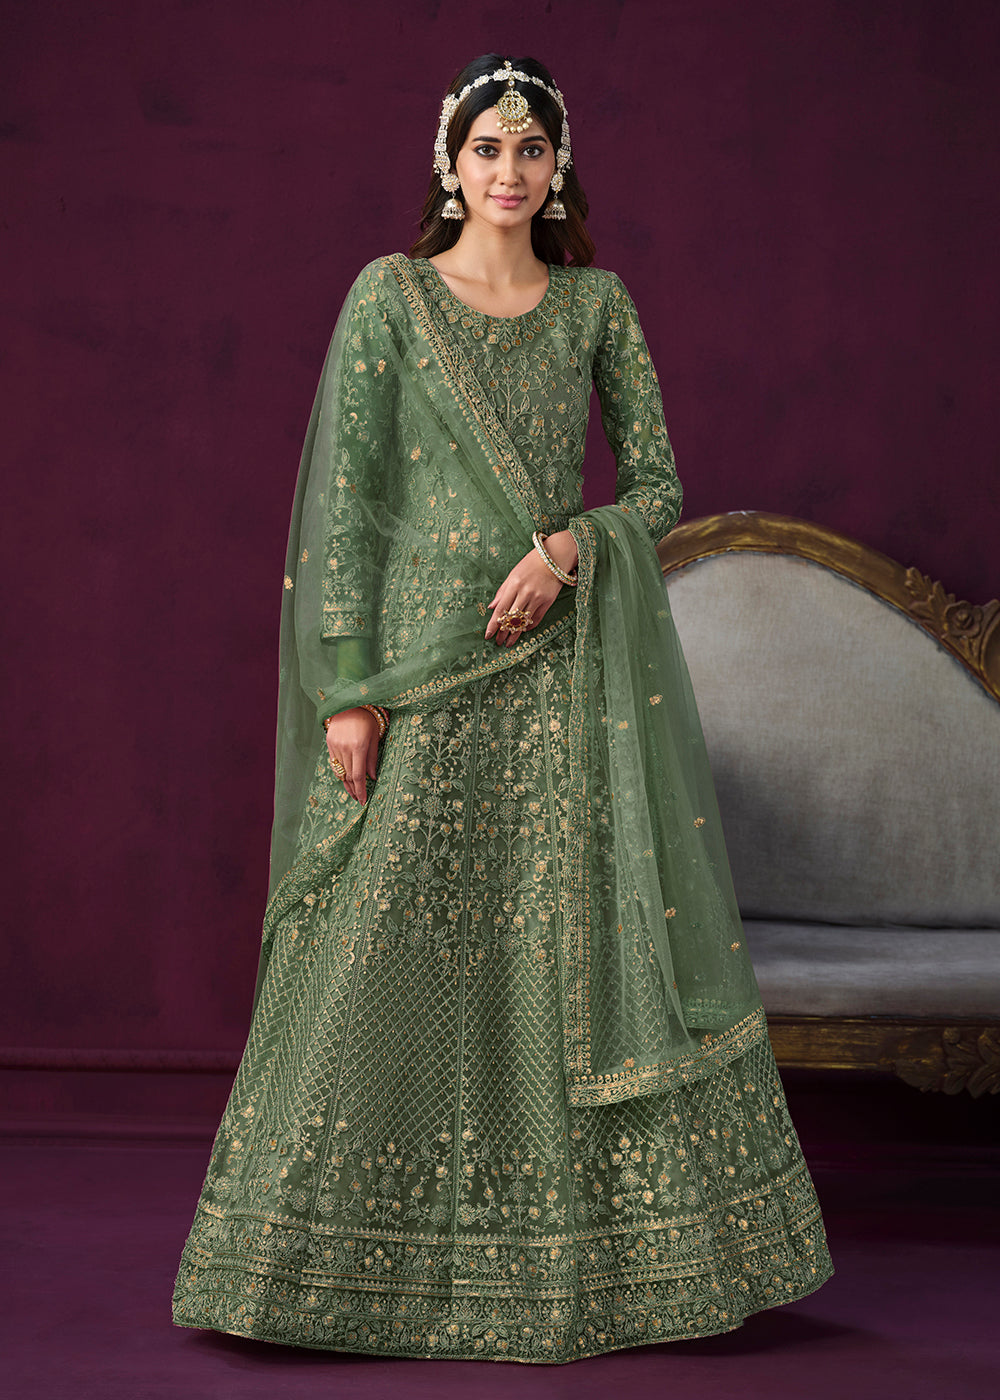 Buy Now Charming Green Embroidered Net Floor Length Anarkali Suit Online in USA, UK, Australia, New Zealand, Canada & Worldwide at Empress Clothing.